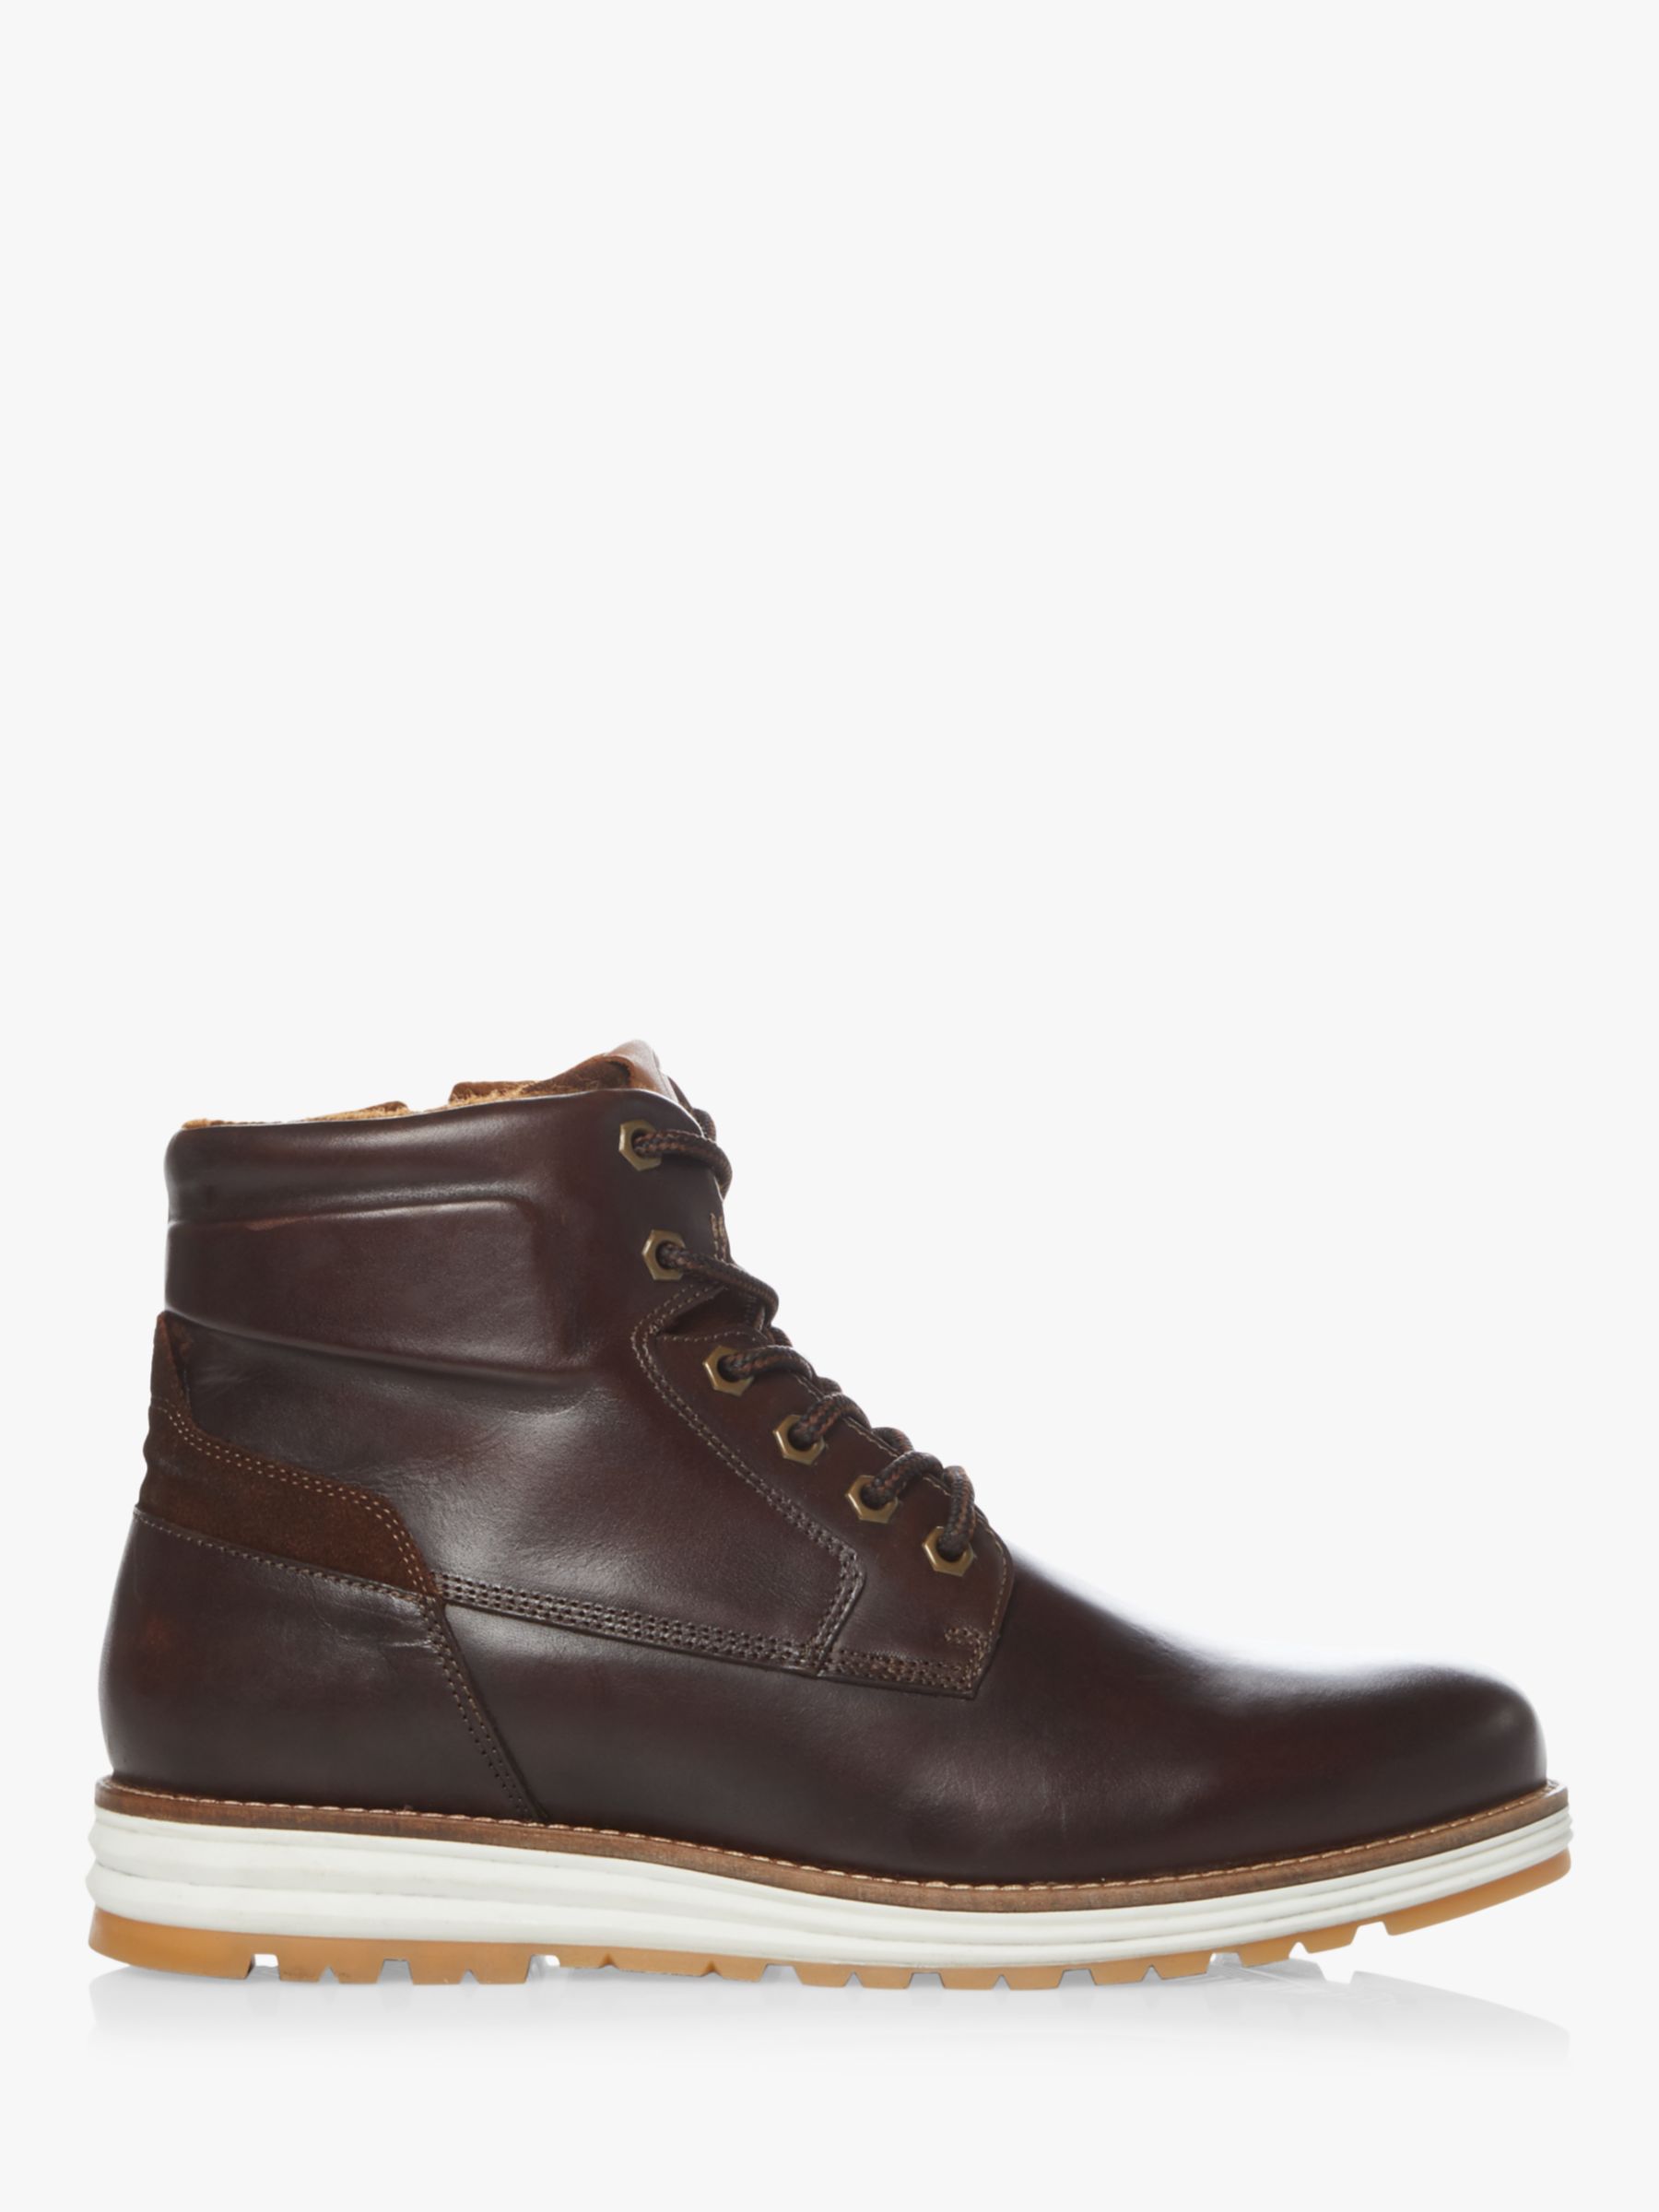 Dune Catchy Casual Wedge Hiker Boots, Brown at John Lewis & Partners